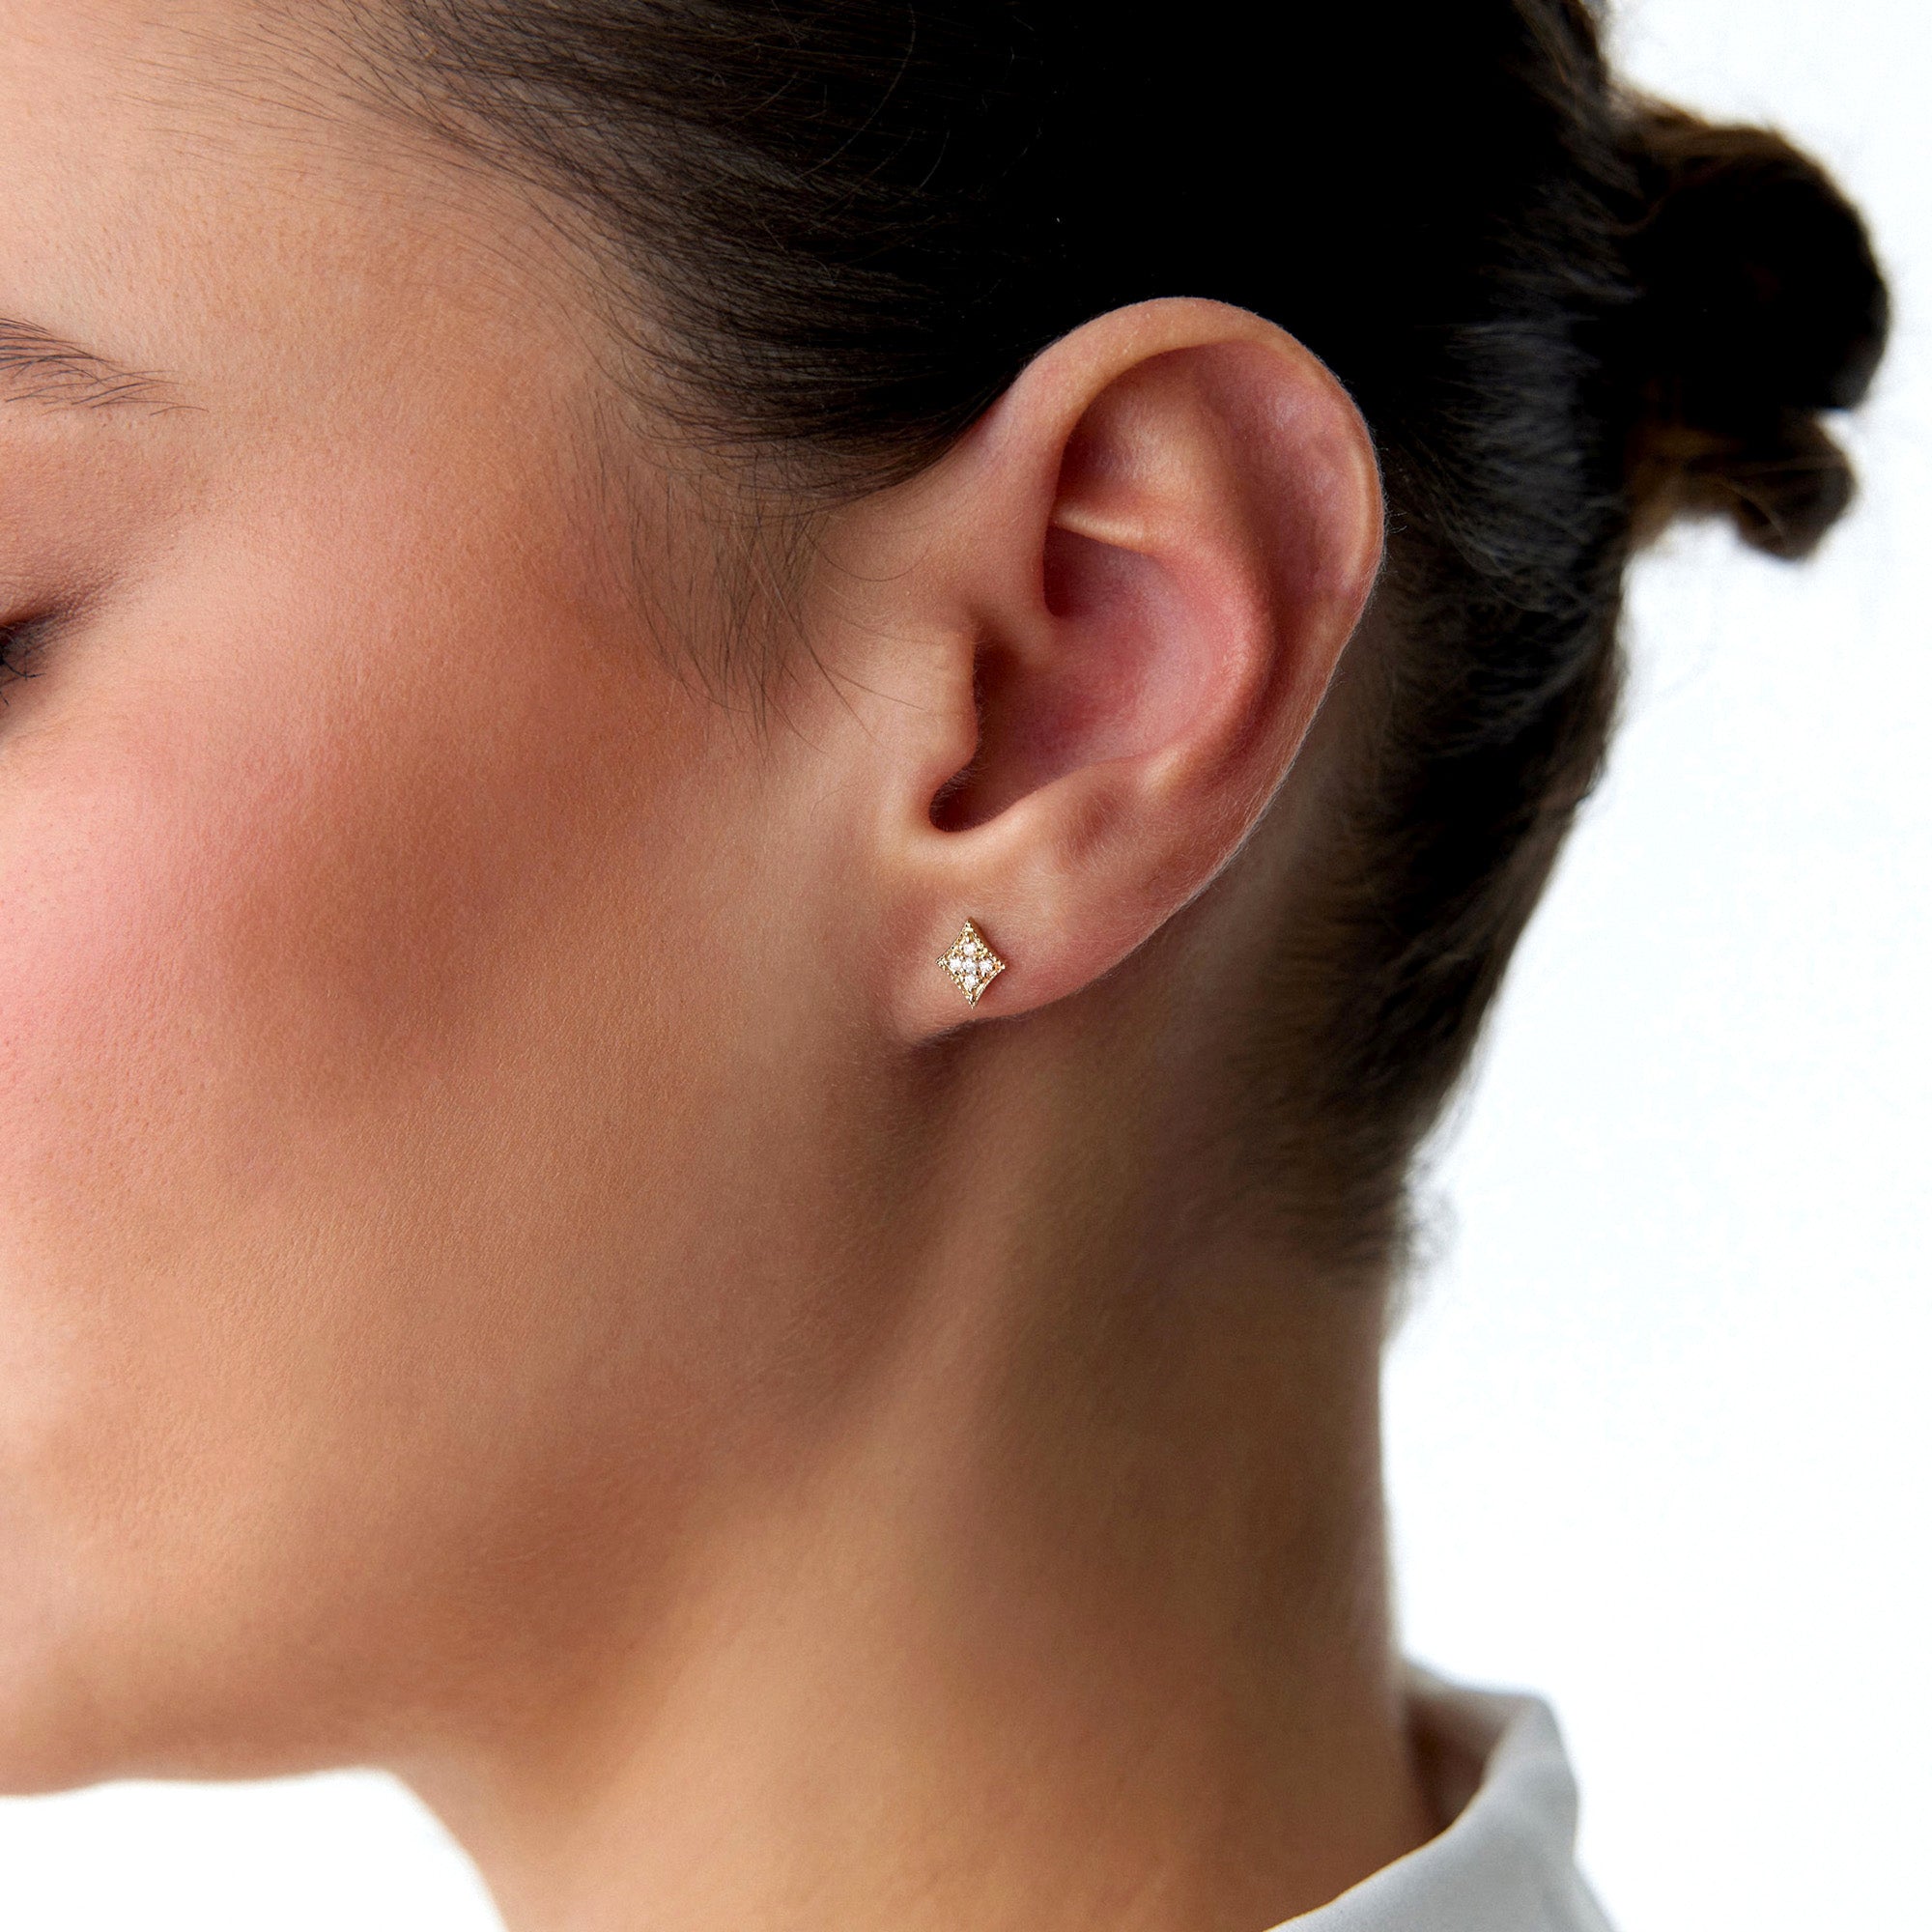 Dainty Diamond Stud Earrings Available in 14K and 18K Gold